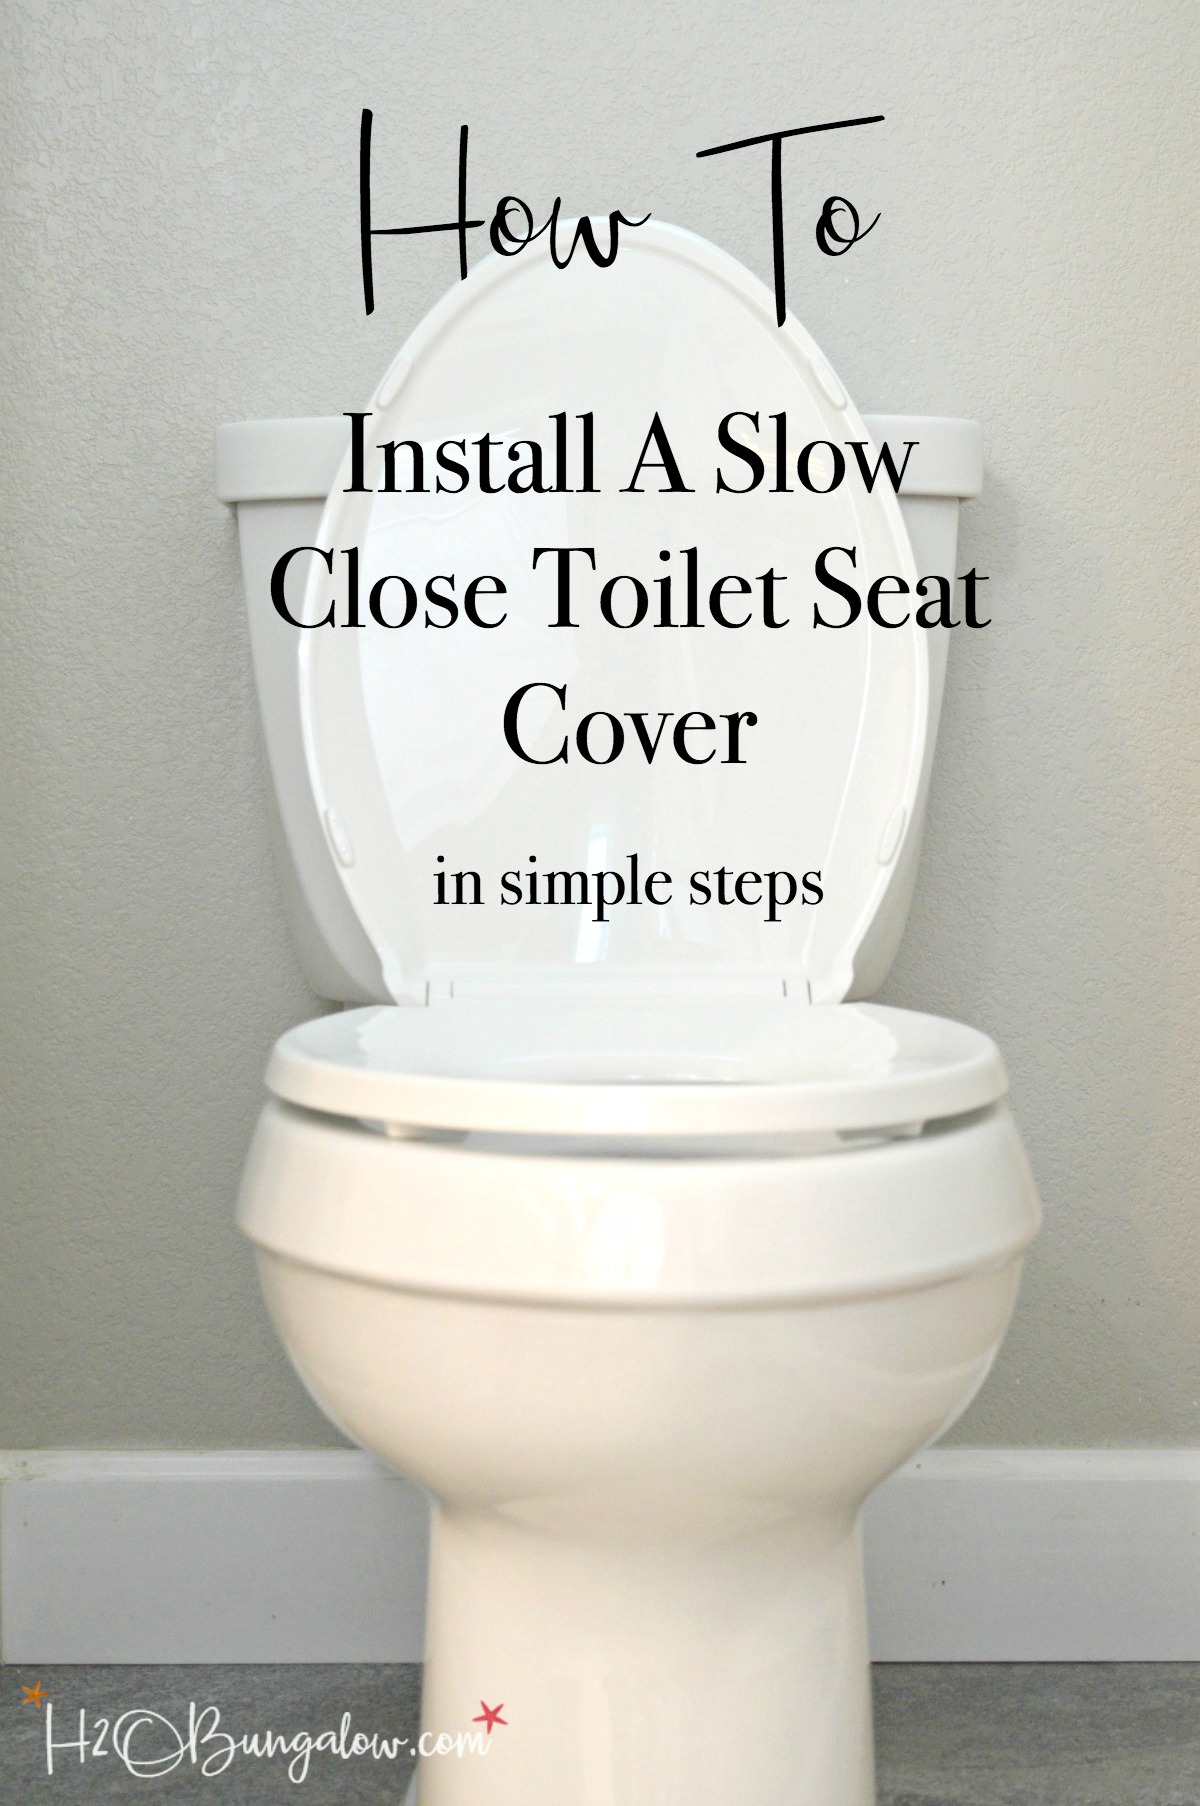 Step by step simple tutorial to install a slow close toilet seat to replace a worn or discolored toilet seat in less than 15 minutes and for under $20! Why waste money paying someone to do something you can do in less than 15 minutes! Find this simple tutorial on H2OBungalow